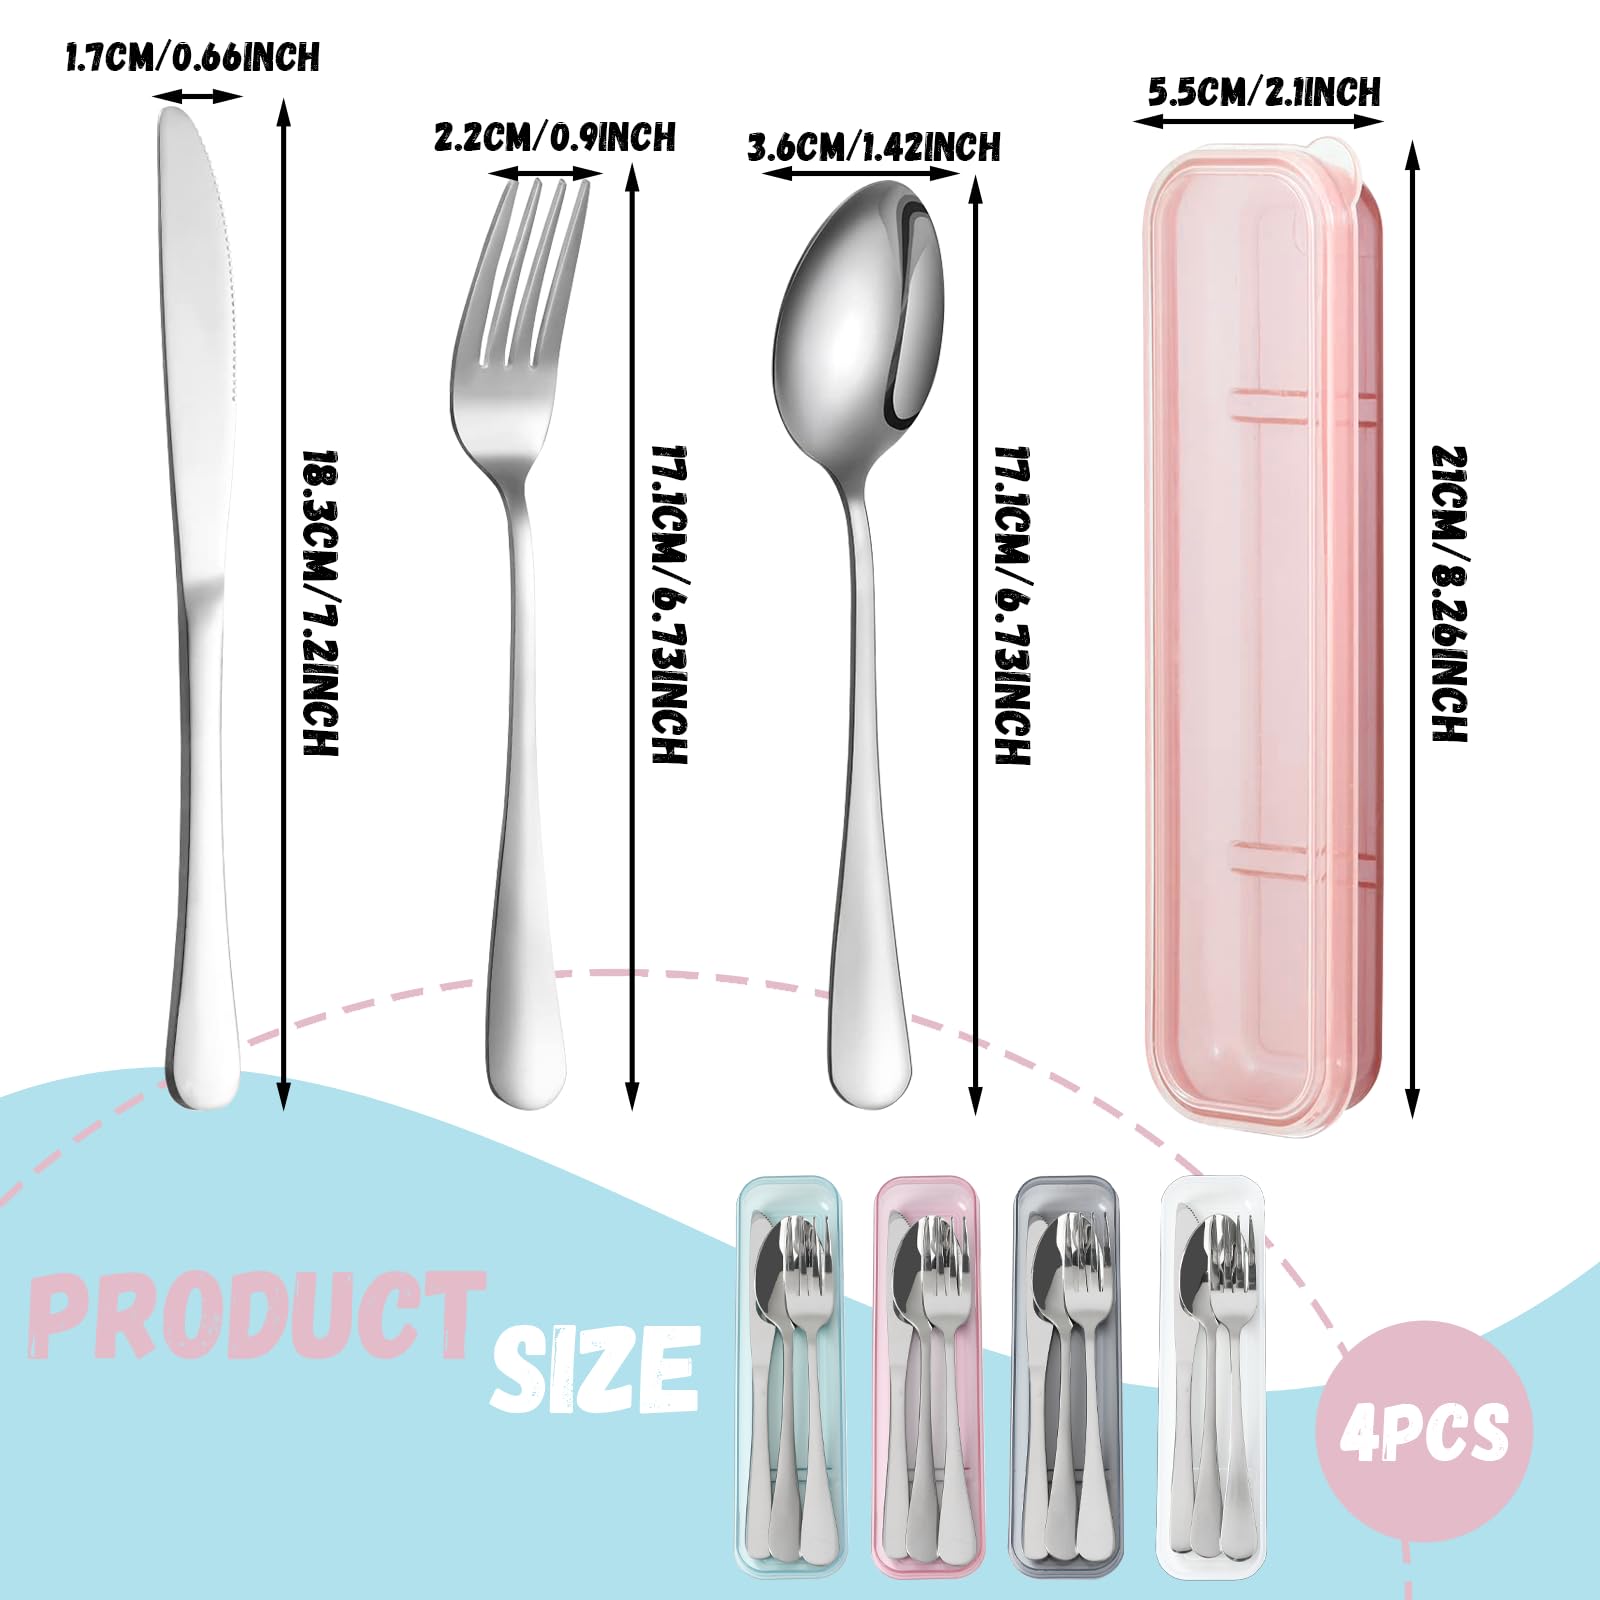 4 Sets Portable Utensils Set with Case Stainless Steel Flatware with Case Travel Reusable Silverware set with Case Camping Fork Spoon Knife Set